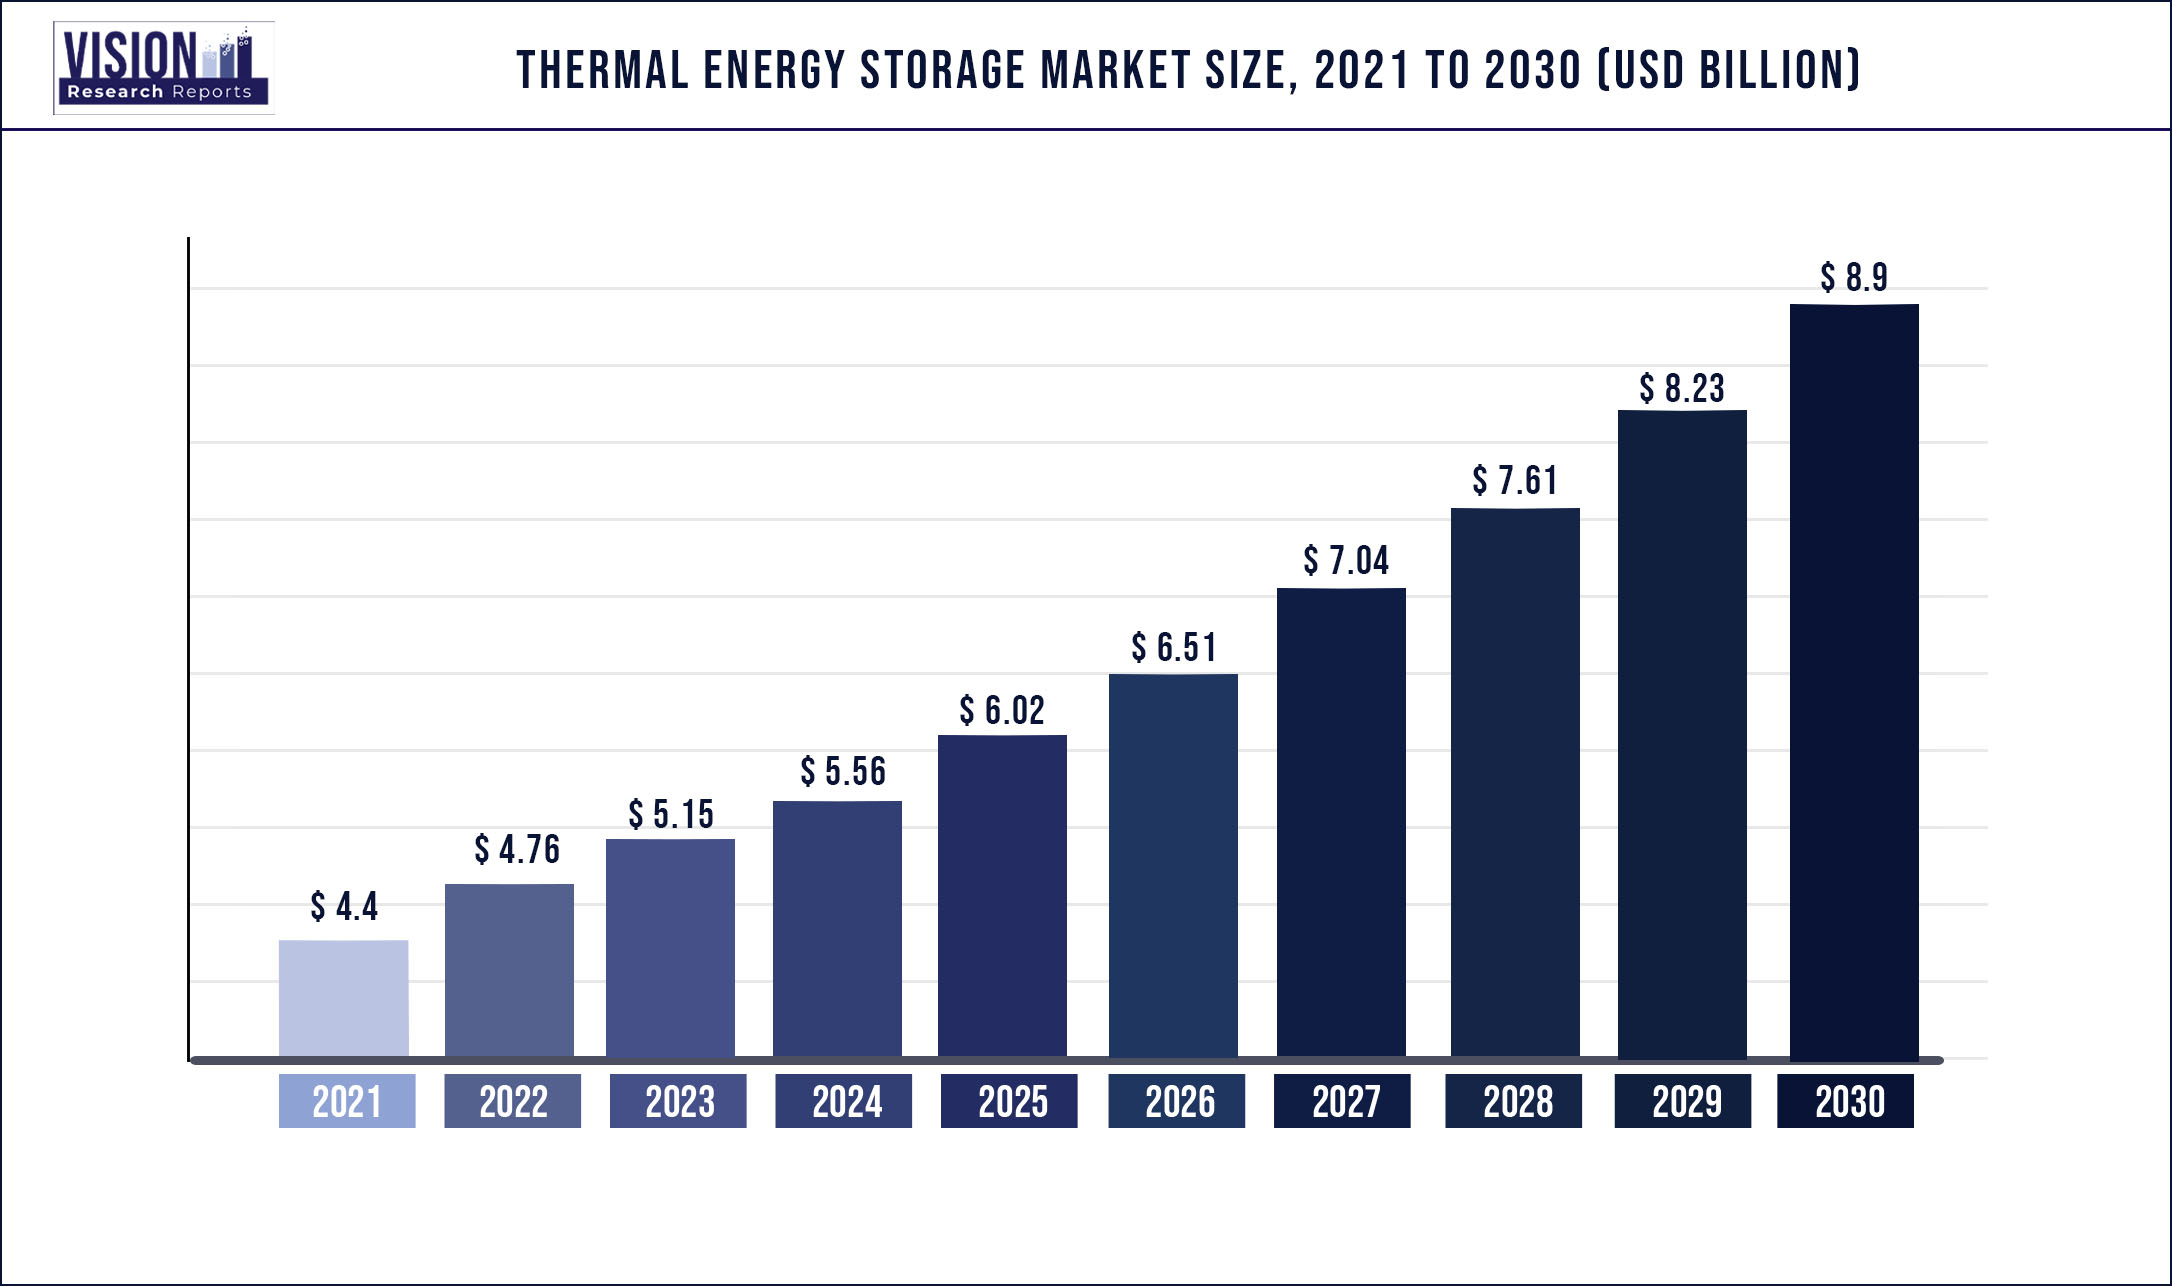 Thermal Energy Storage Market Size 2021 to 2030